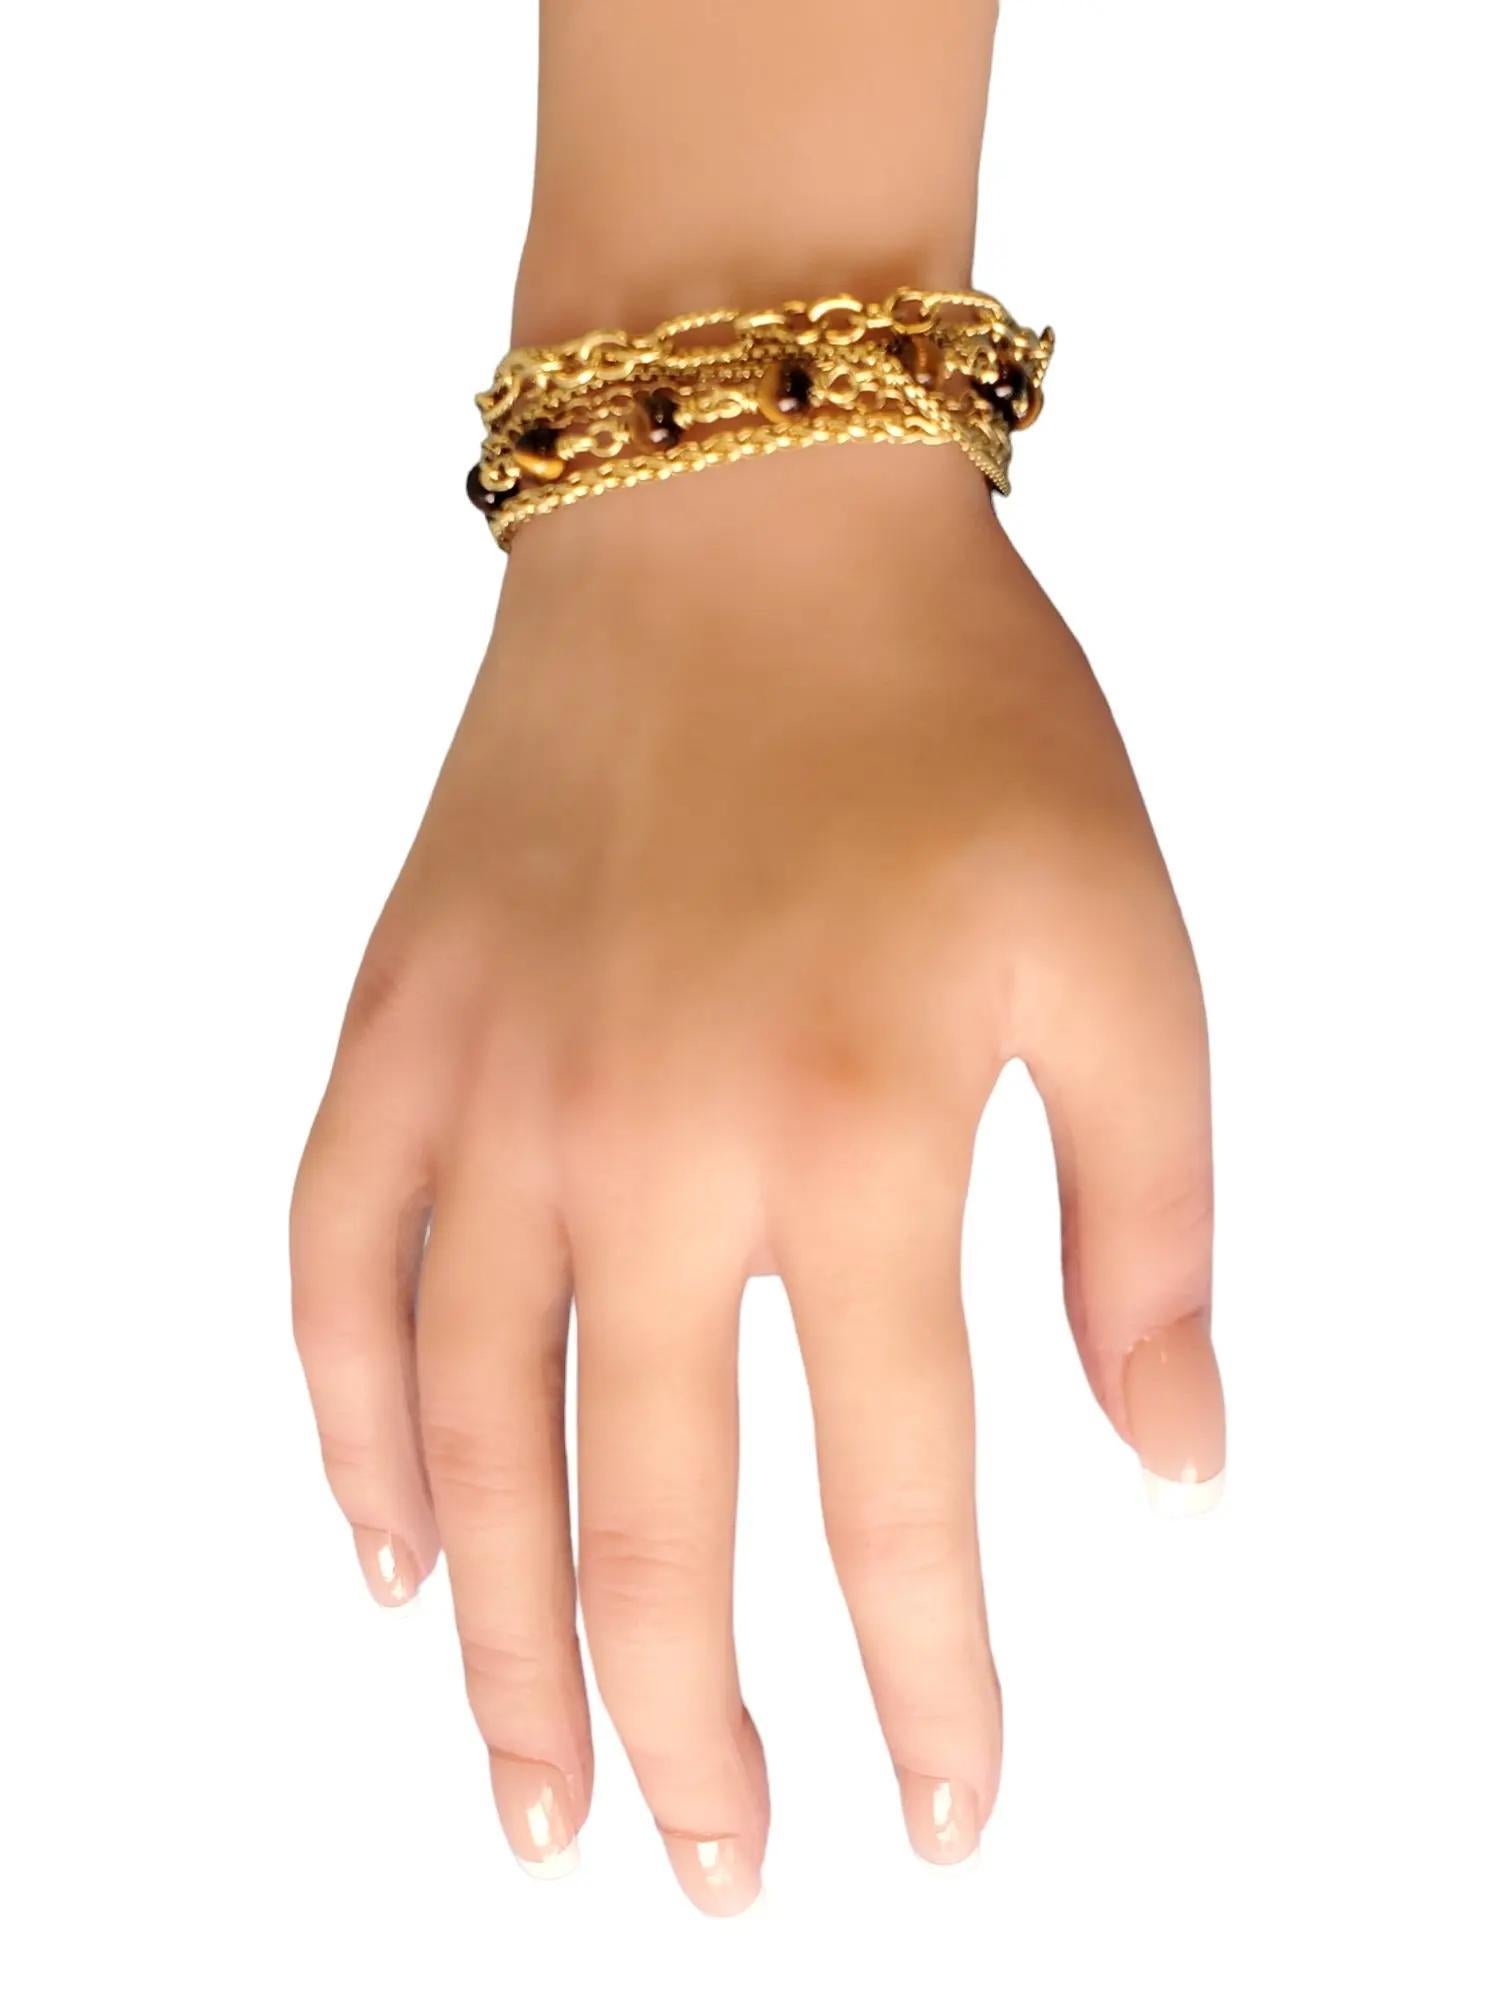 This listing is for a very unique heavy 18k multi-chain Estate David Yurman Bracelet in yellow gold with Tigers eye stones. Beautifully designed and very well made authenticated and stamped. Retail was most likely upwards of 30,000. Make it yours.